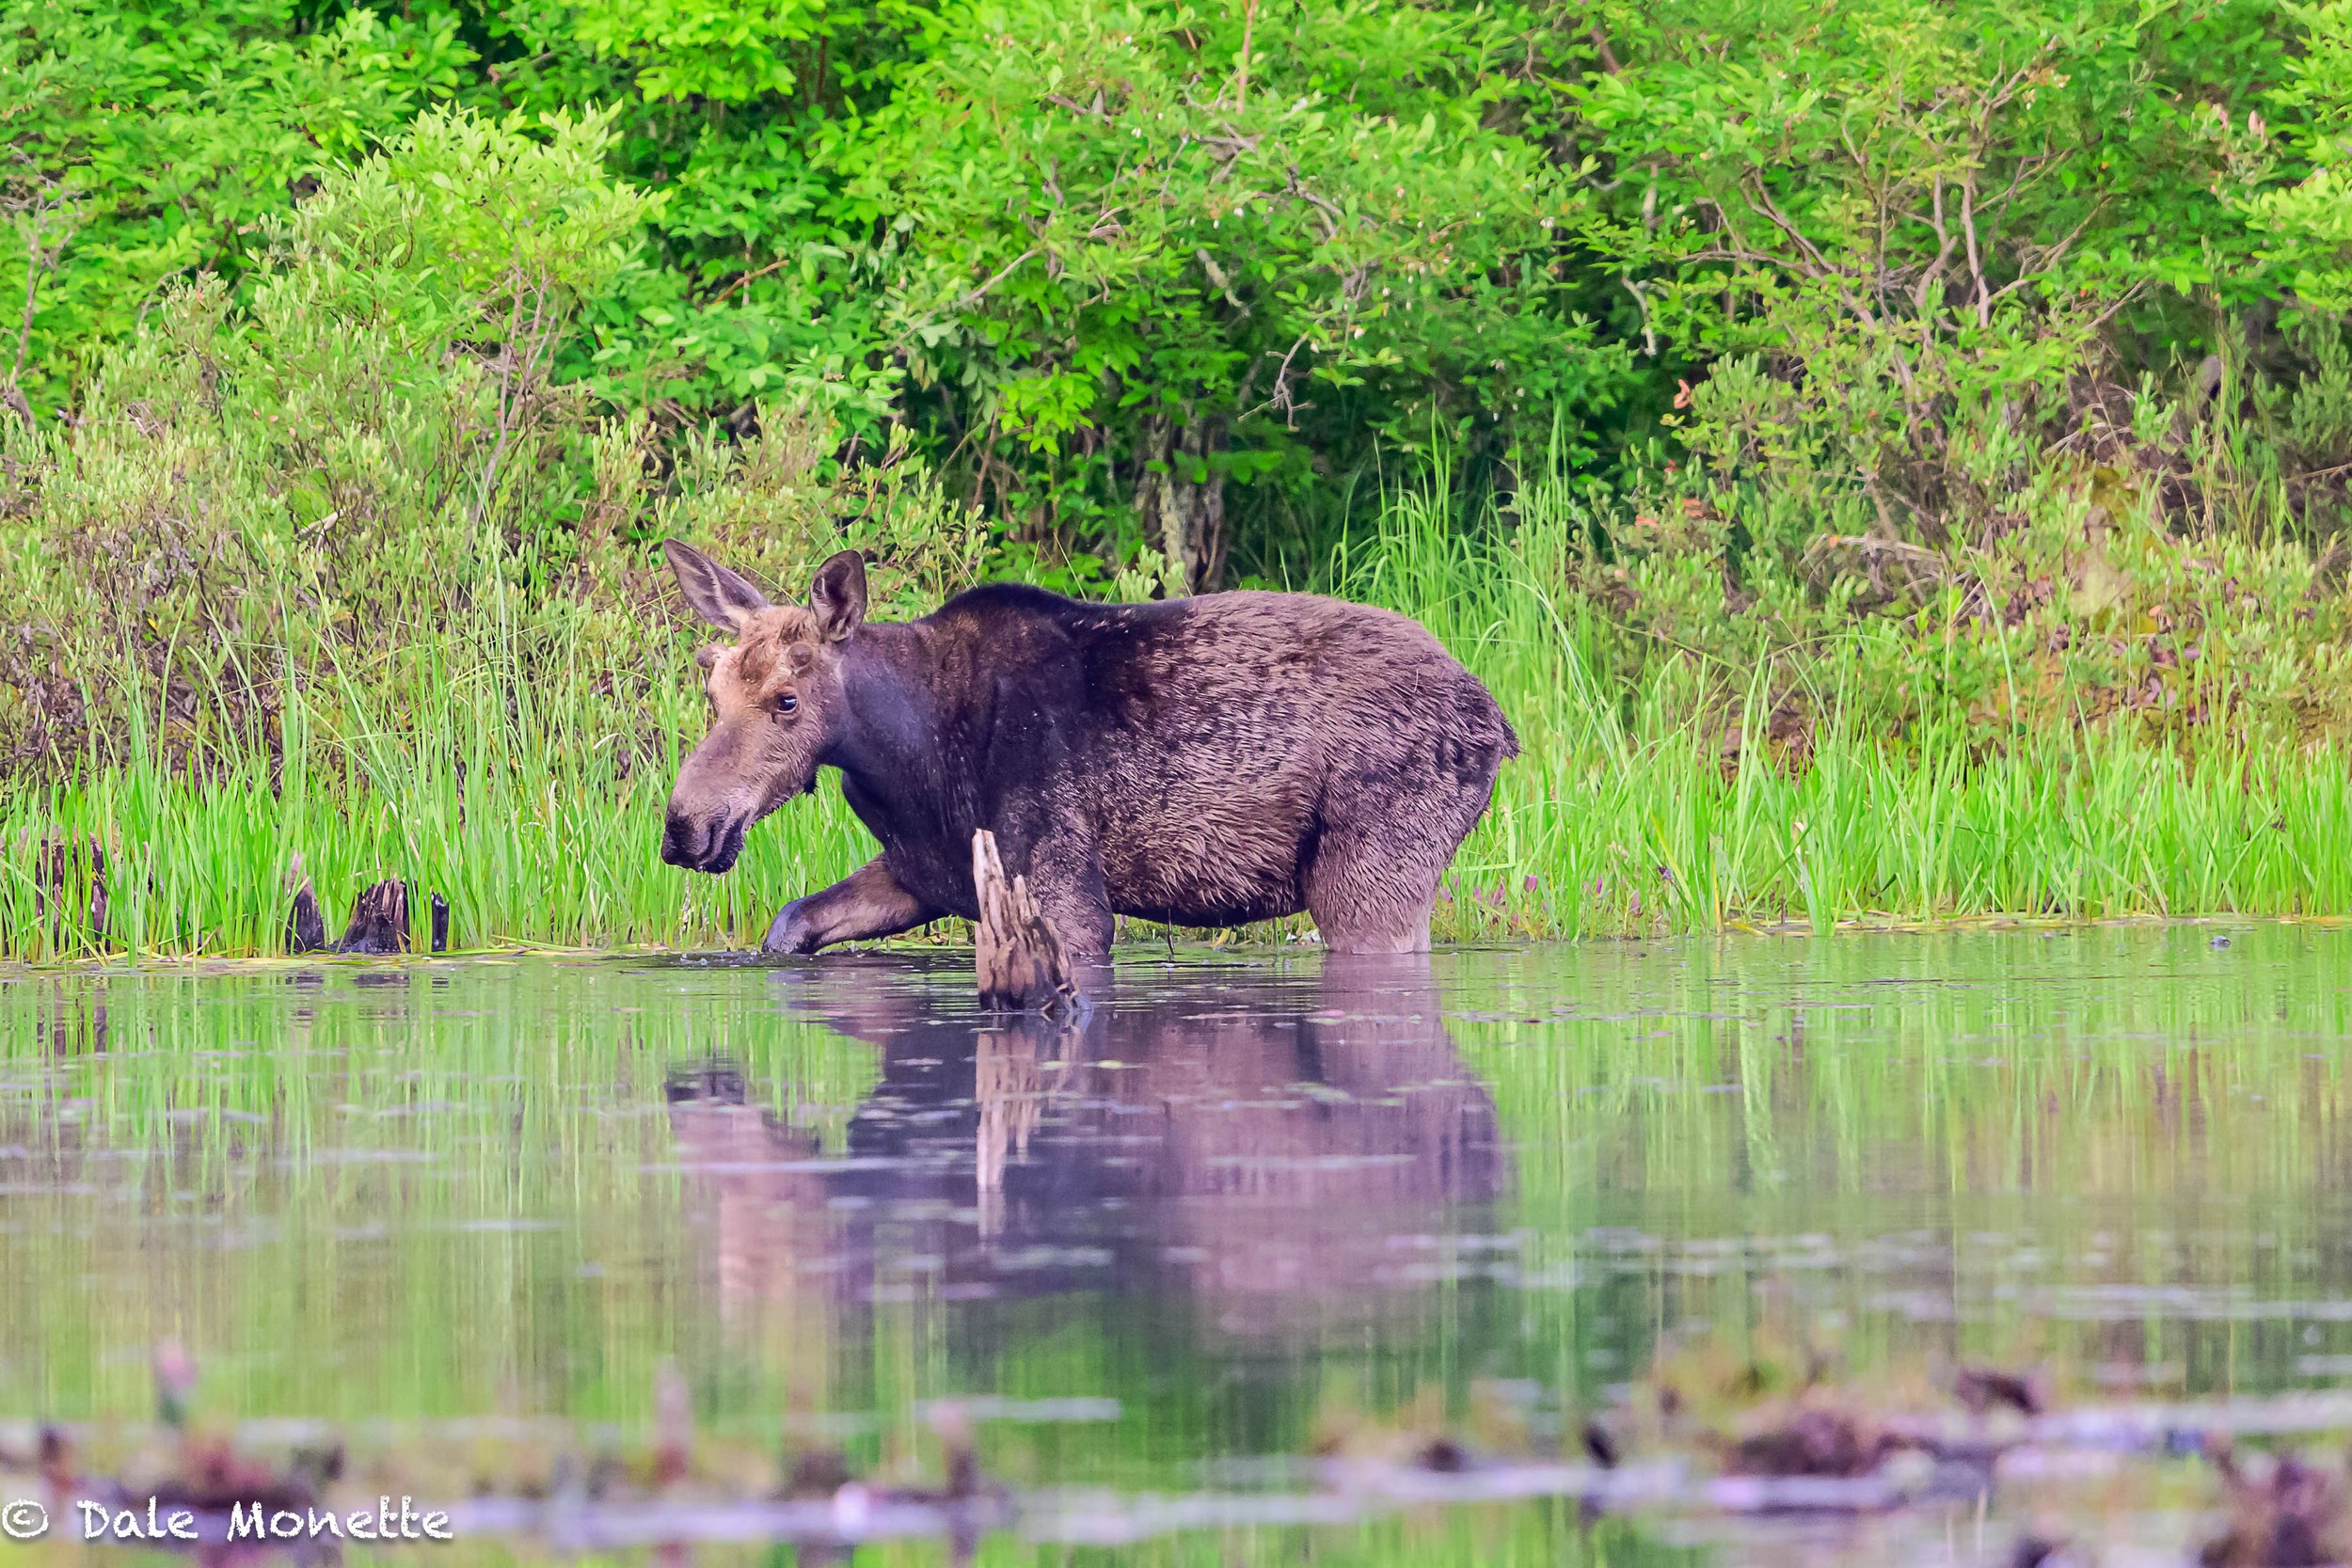   This is the first moose I have discovered in the ponds this year. A small year old bull.  Notice the small antlers just starting to grow. ……Ma was not far away..  I have her pictures also.  